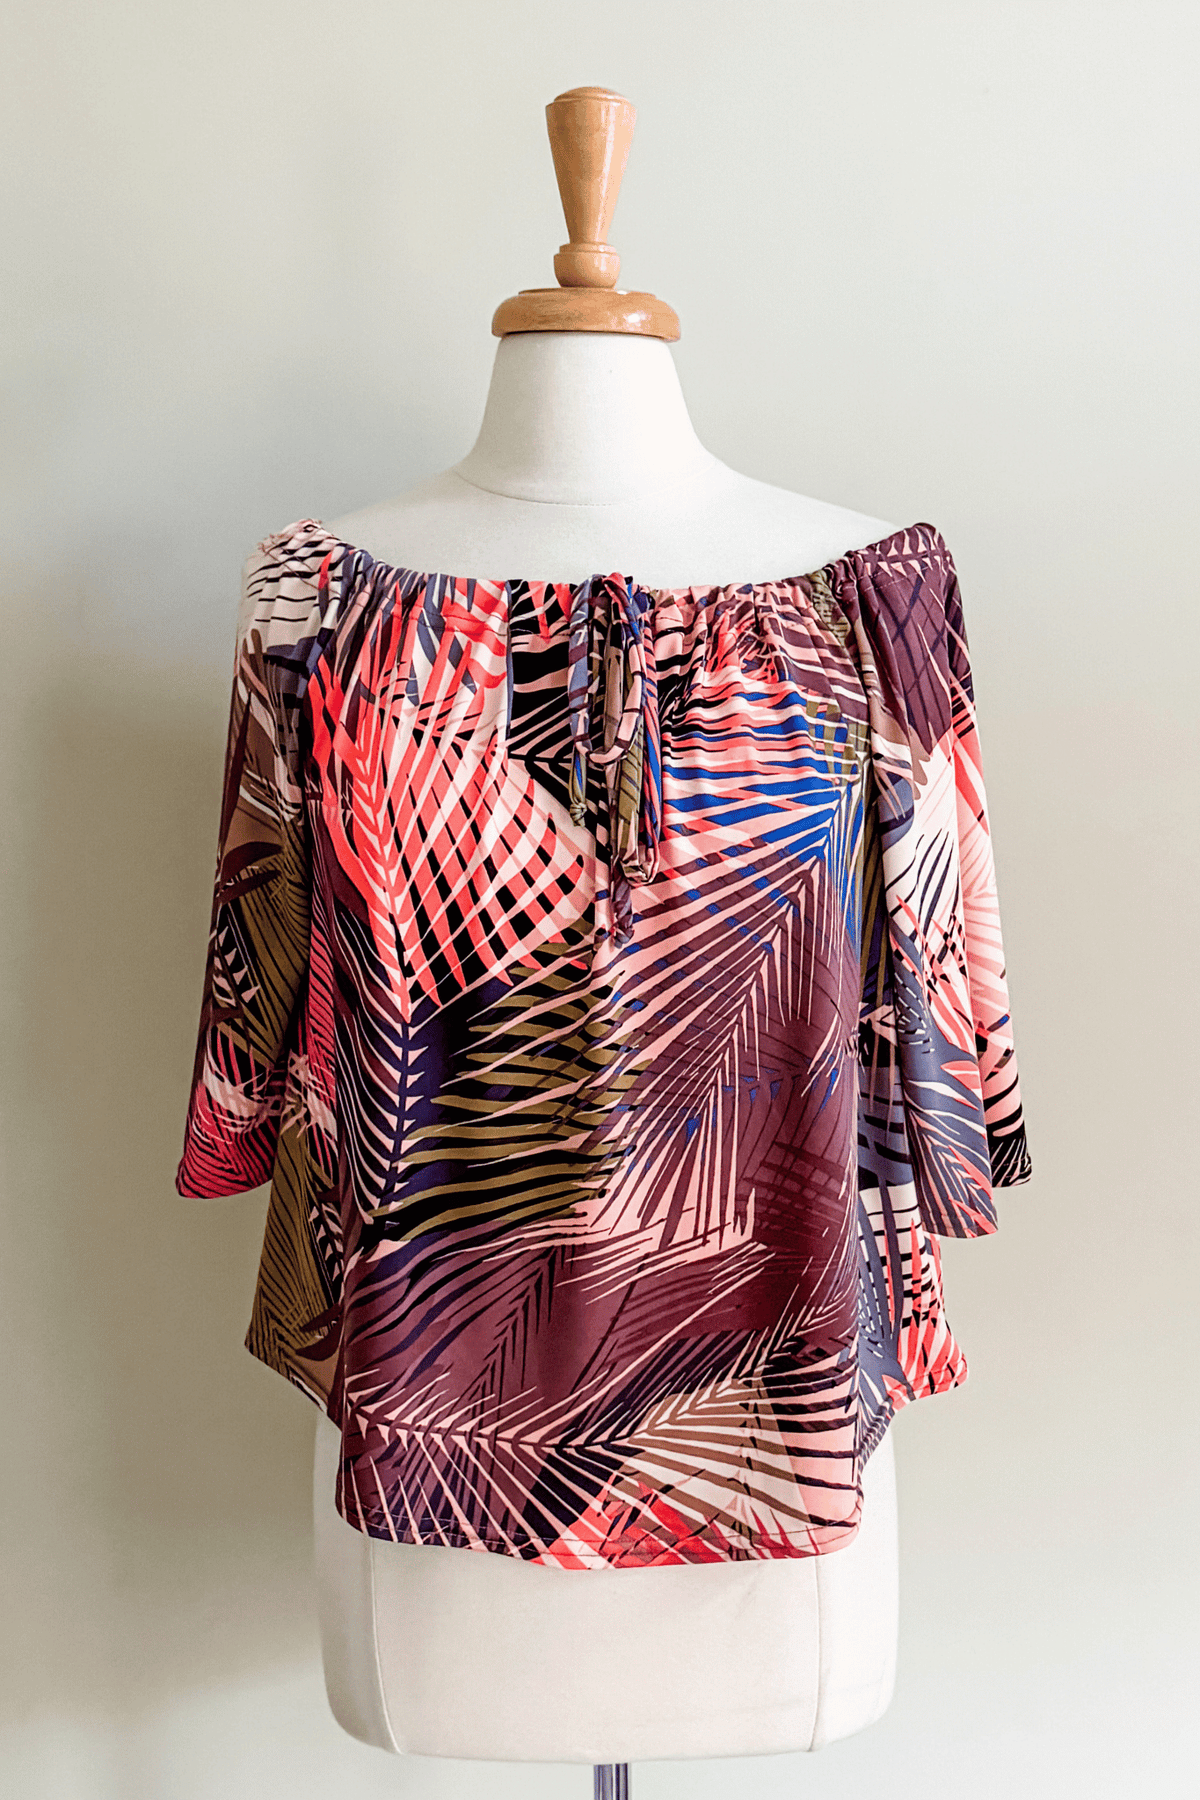 Diane Kroe Evermore Top in Sunset Palm